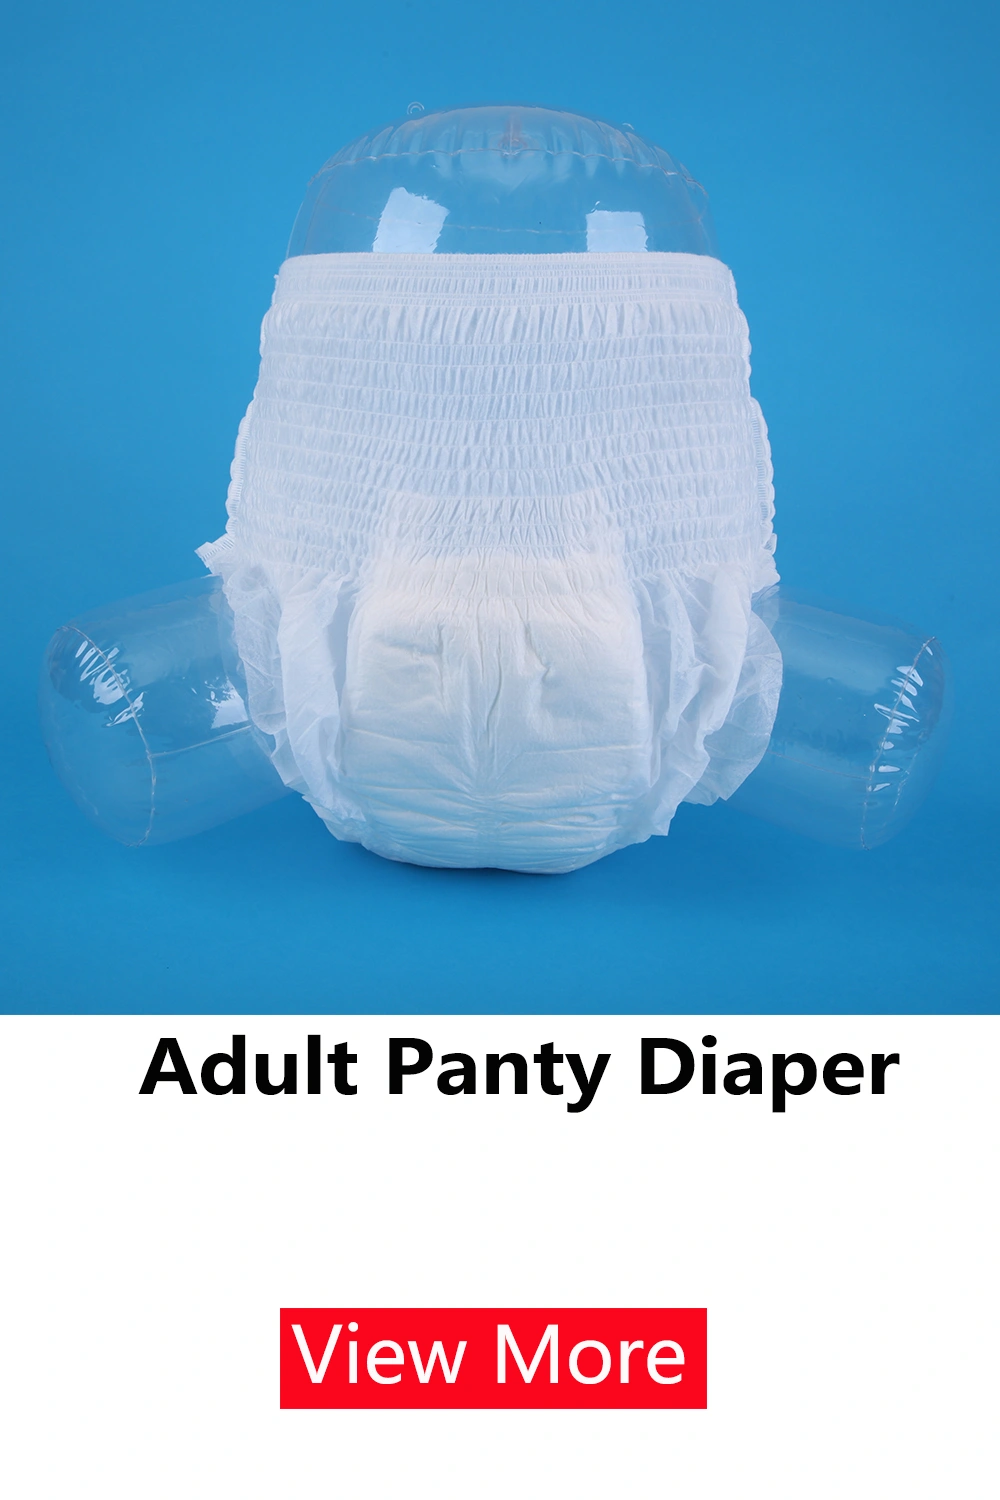 Bed pad related product adult panty diaper picture